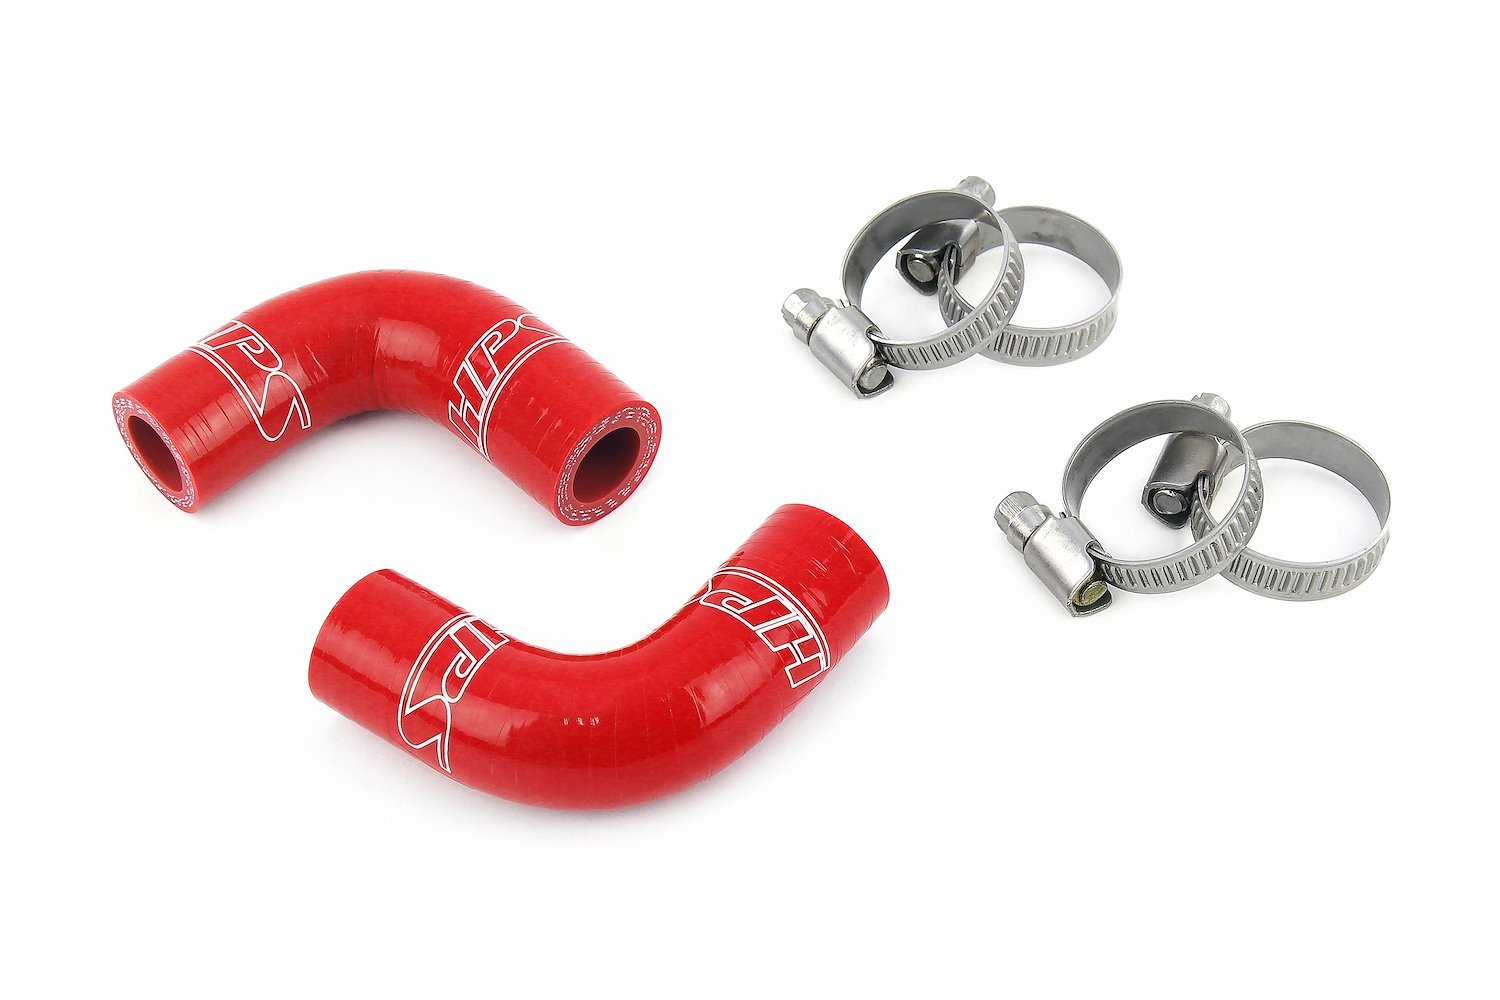 57-2068-RED Silicone Coolant Hose Kit, 3-Ply Reinforced Silicone, Replaces Rubber Heater & Transmission Coolant Hoses